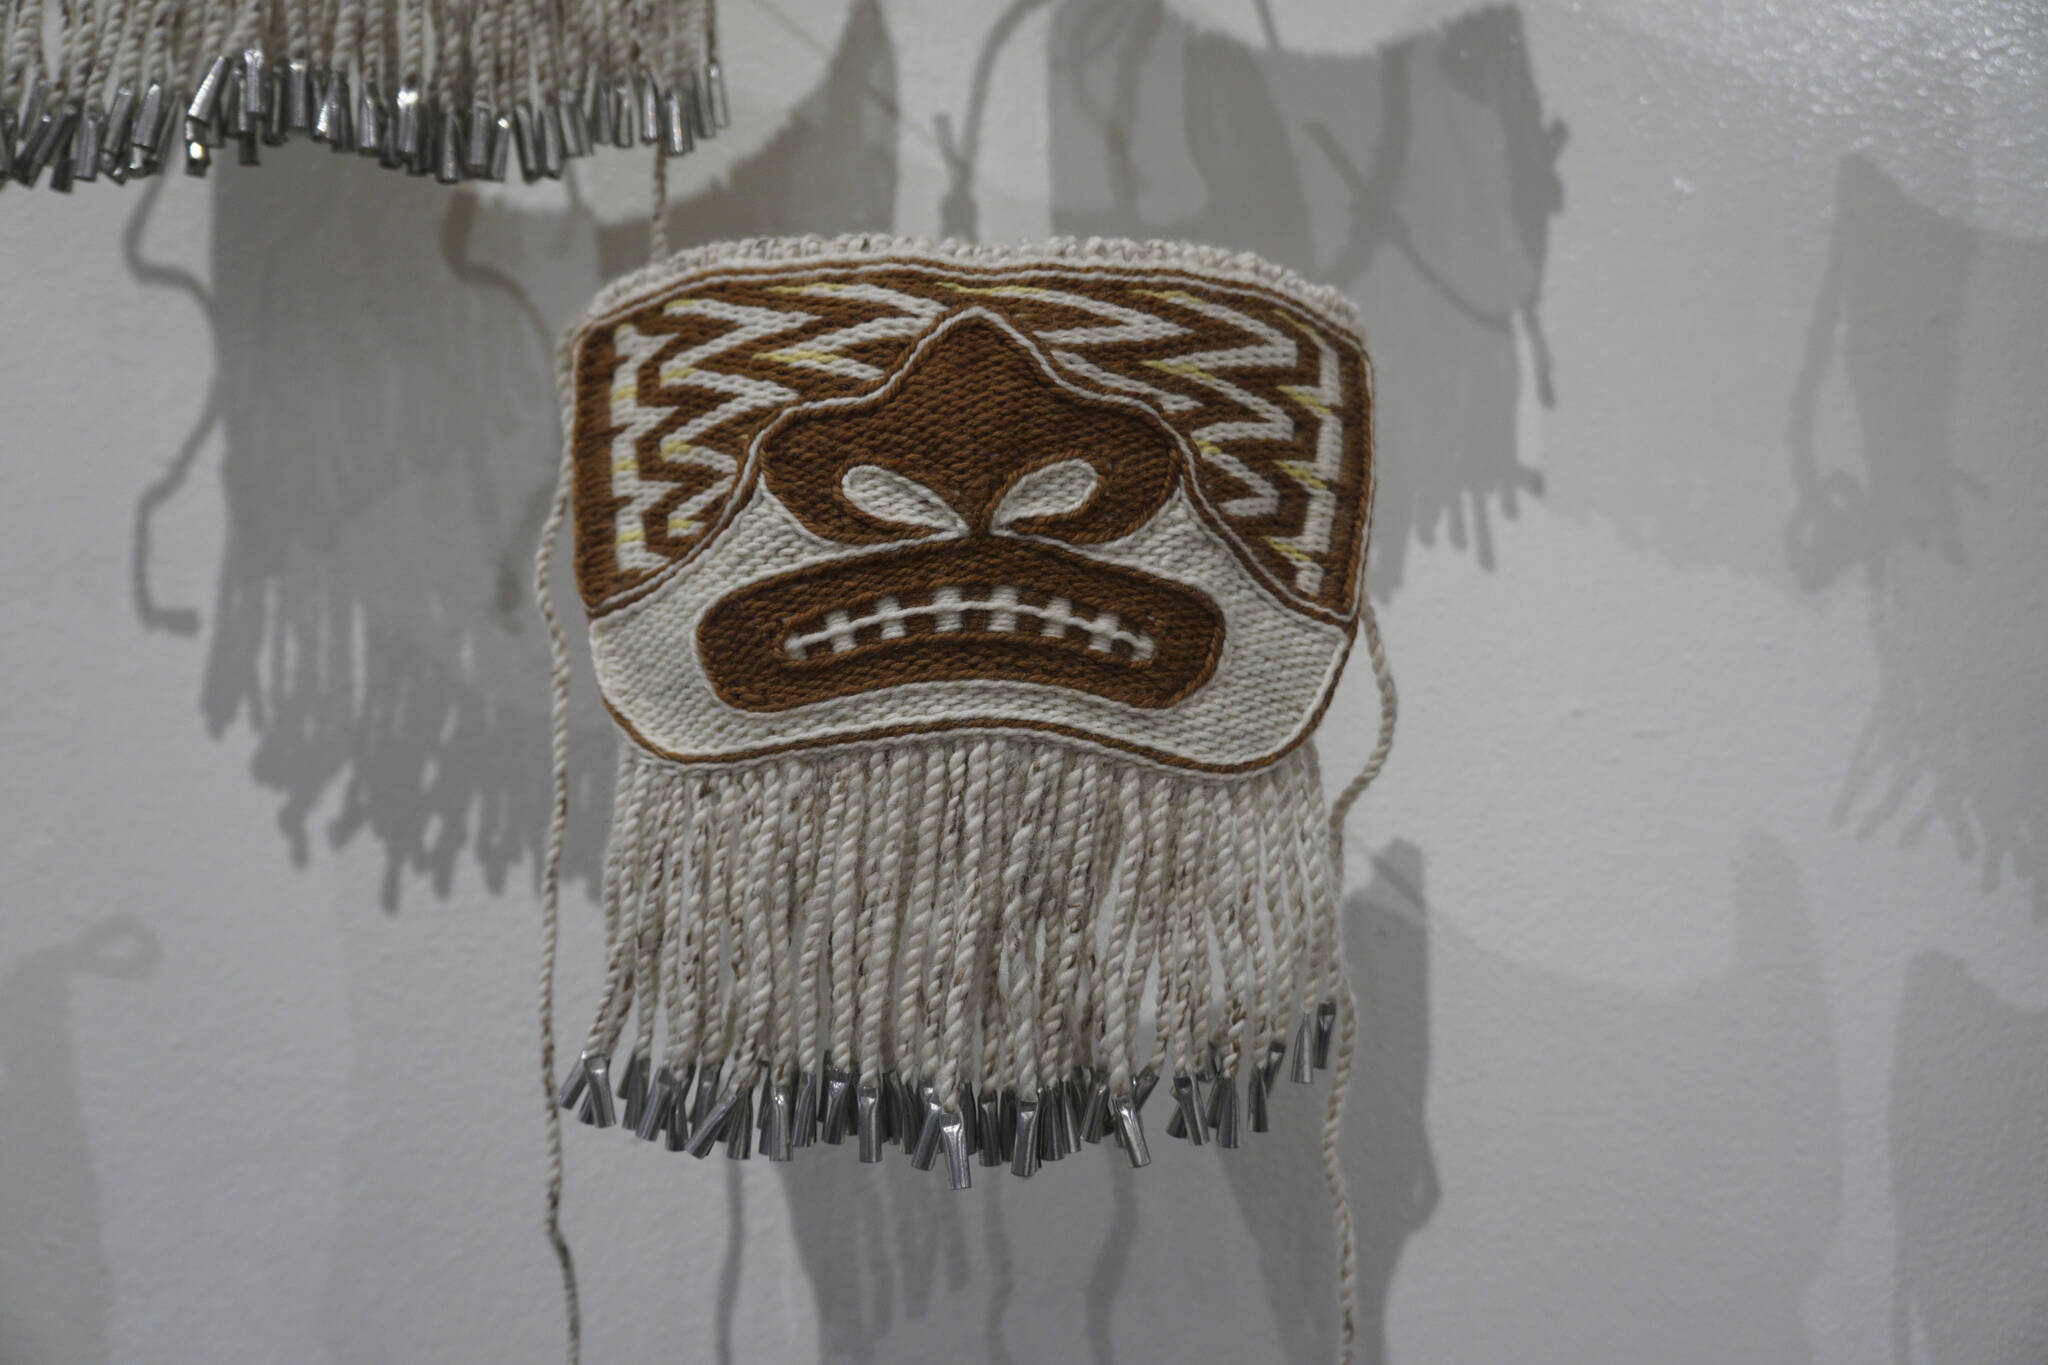 One of the Chilkat protector masks made in a Zoom workshop led by Lily Wooshkindein Da.áat Hope of Juneau and on display in the “Protection: Adaptation and Resistance” show at the Pratt Museum & Park in Homer, Alaska. The show continues through Sept. 24, 2022. (Photo by Michael Armstrong/Homer News)